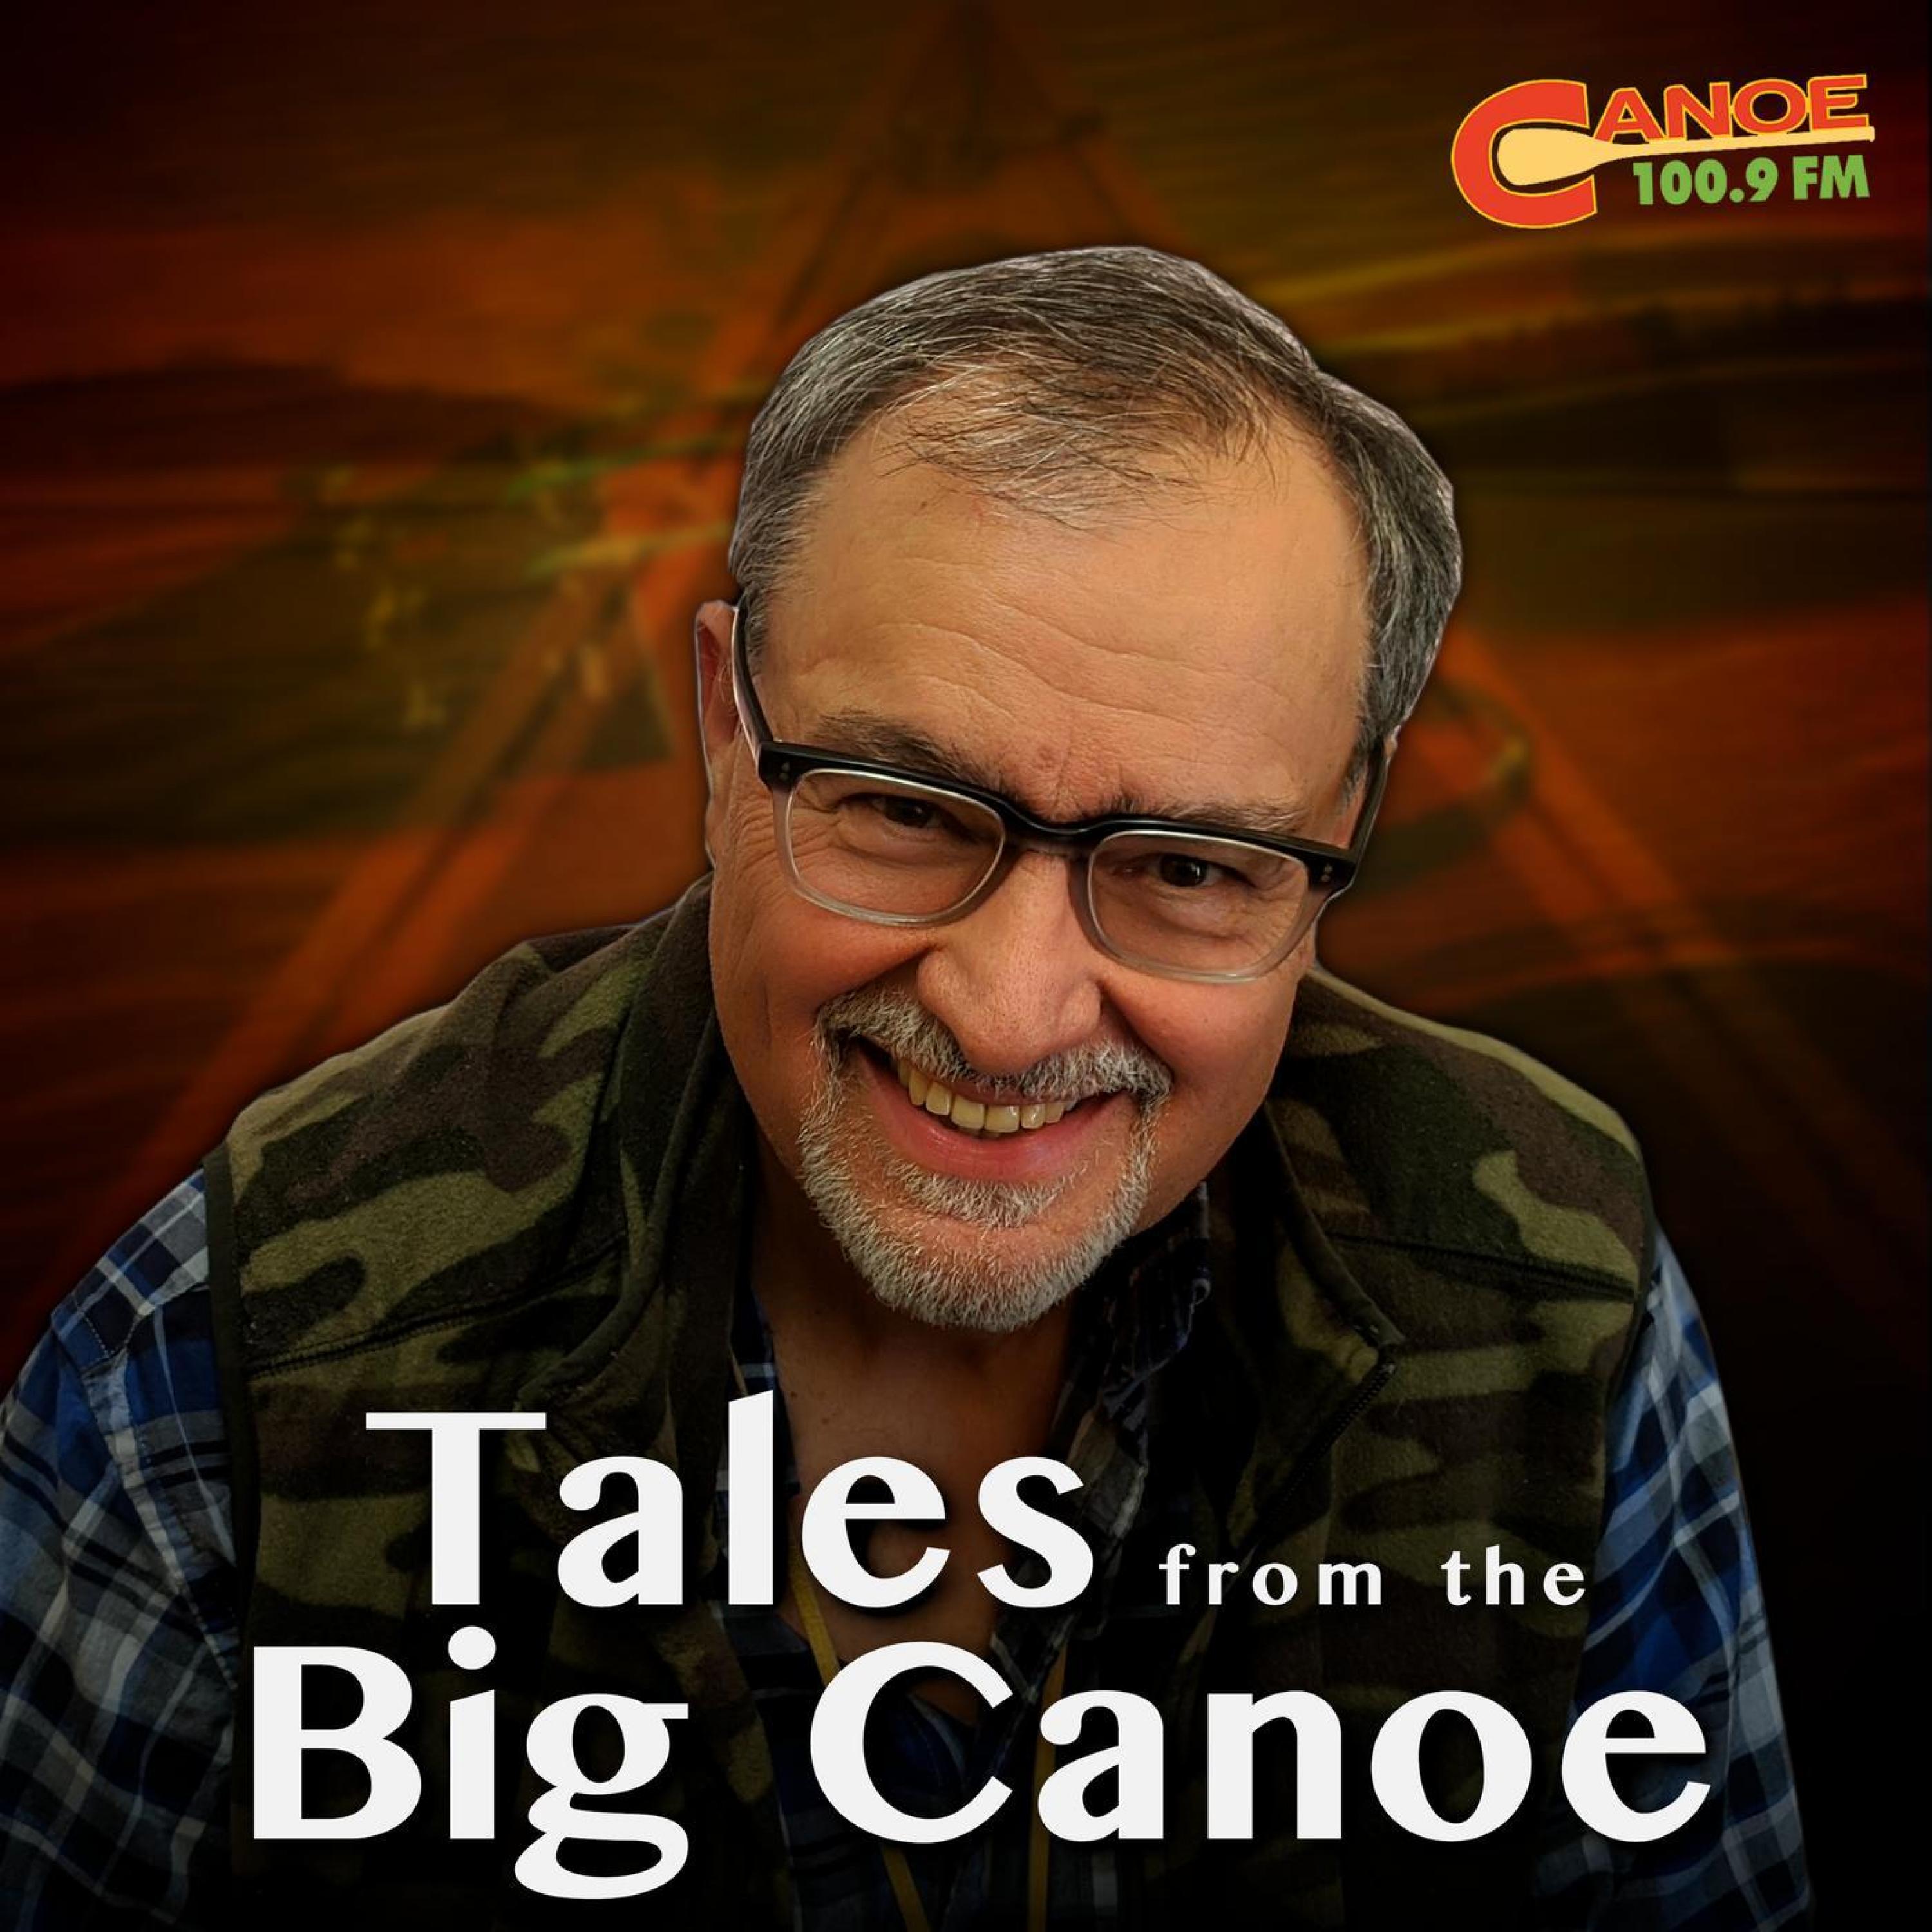 Tales from the Big Canoe